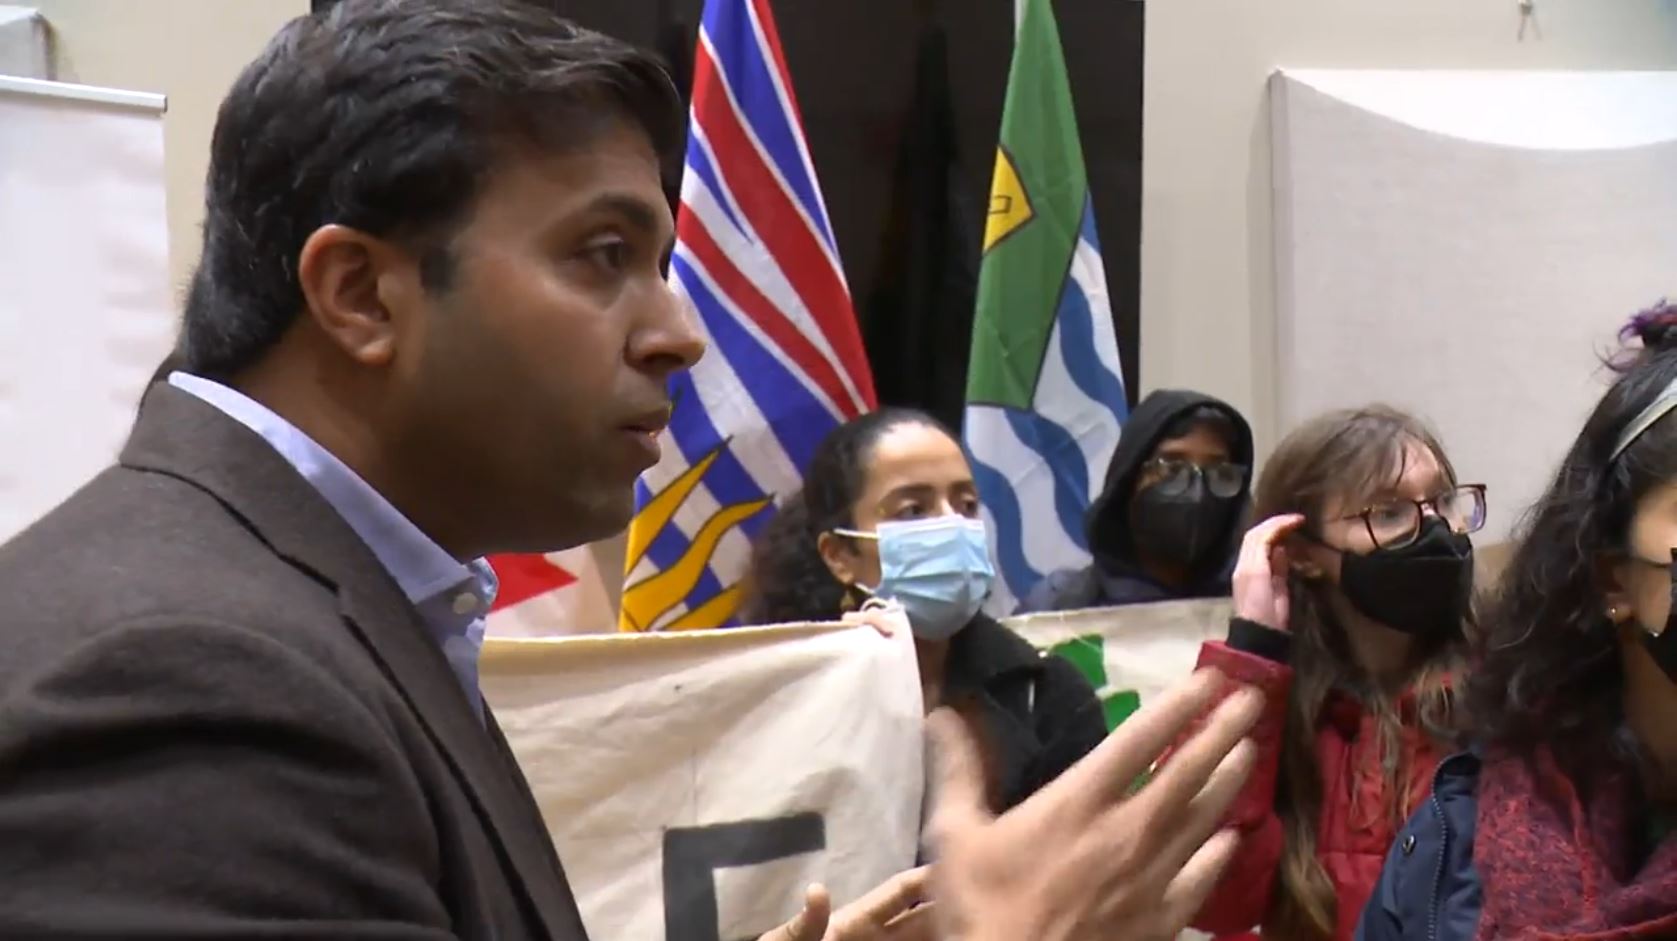 Pro-Palestinian protesters interrupt opioid epidemic townhall in Vancouver